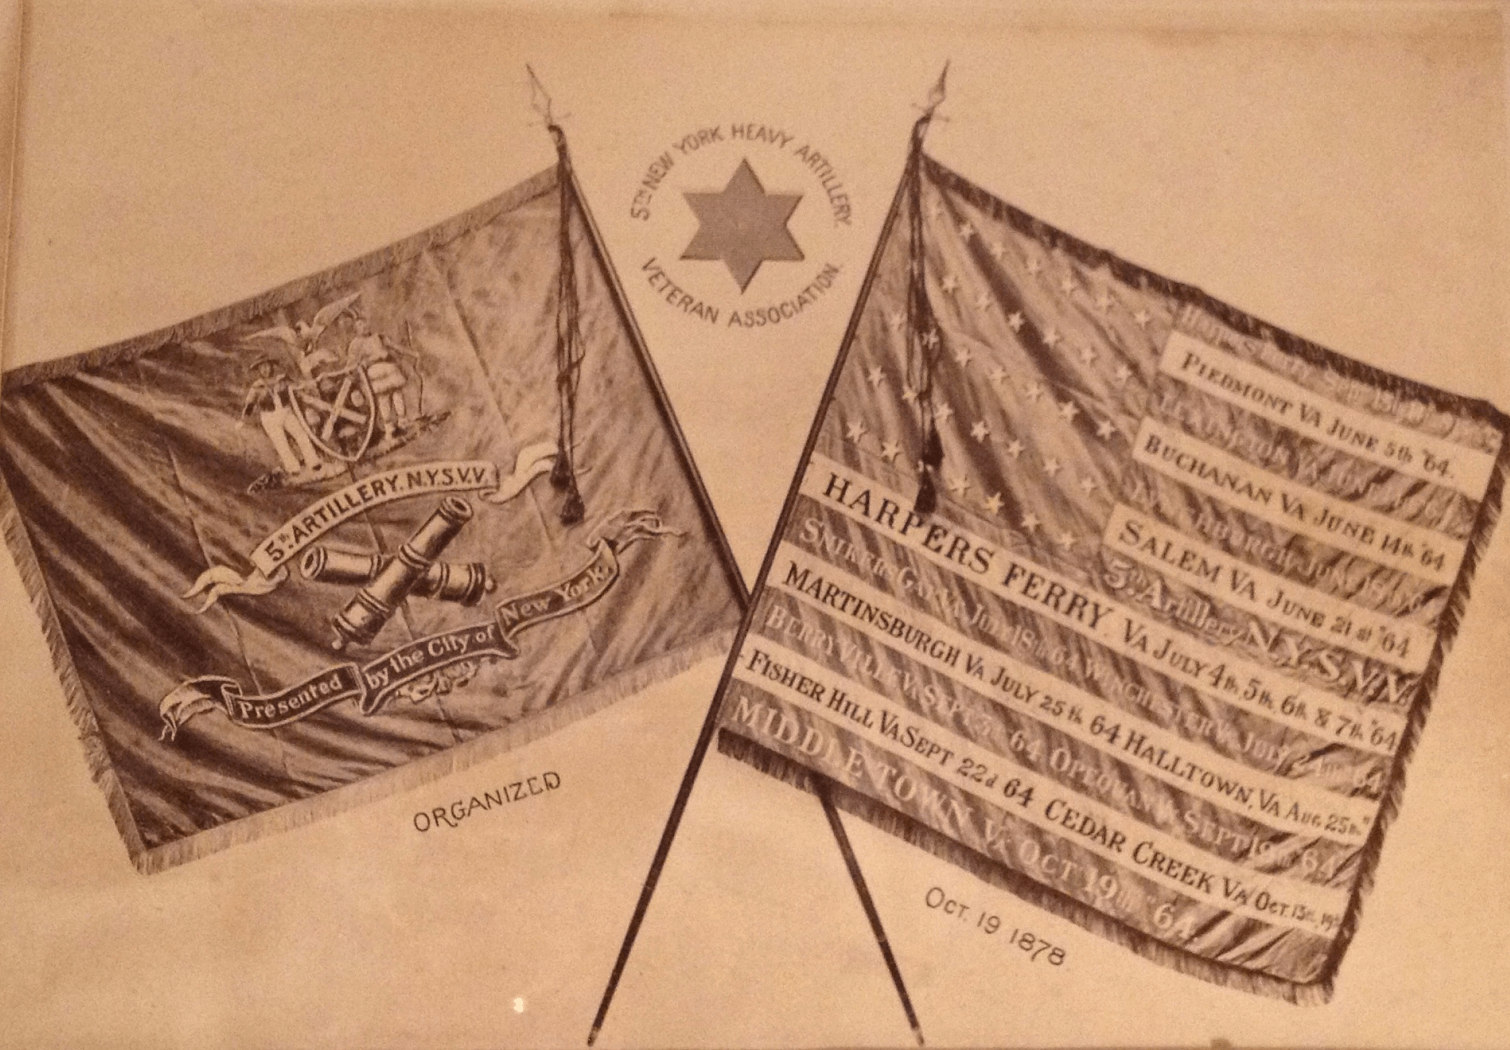 5th NYHA Flags (From J. Noyalas, private collection)